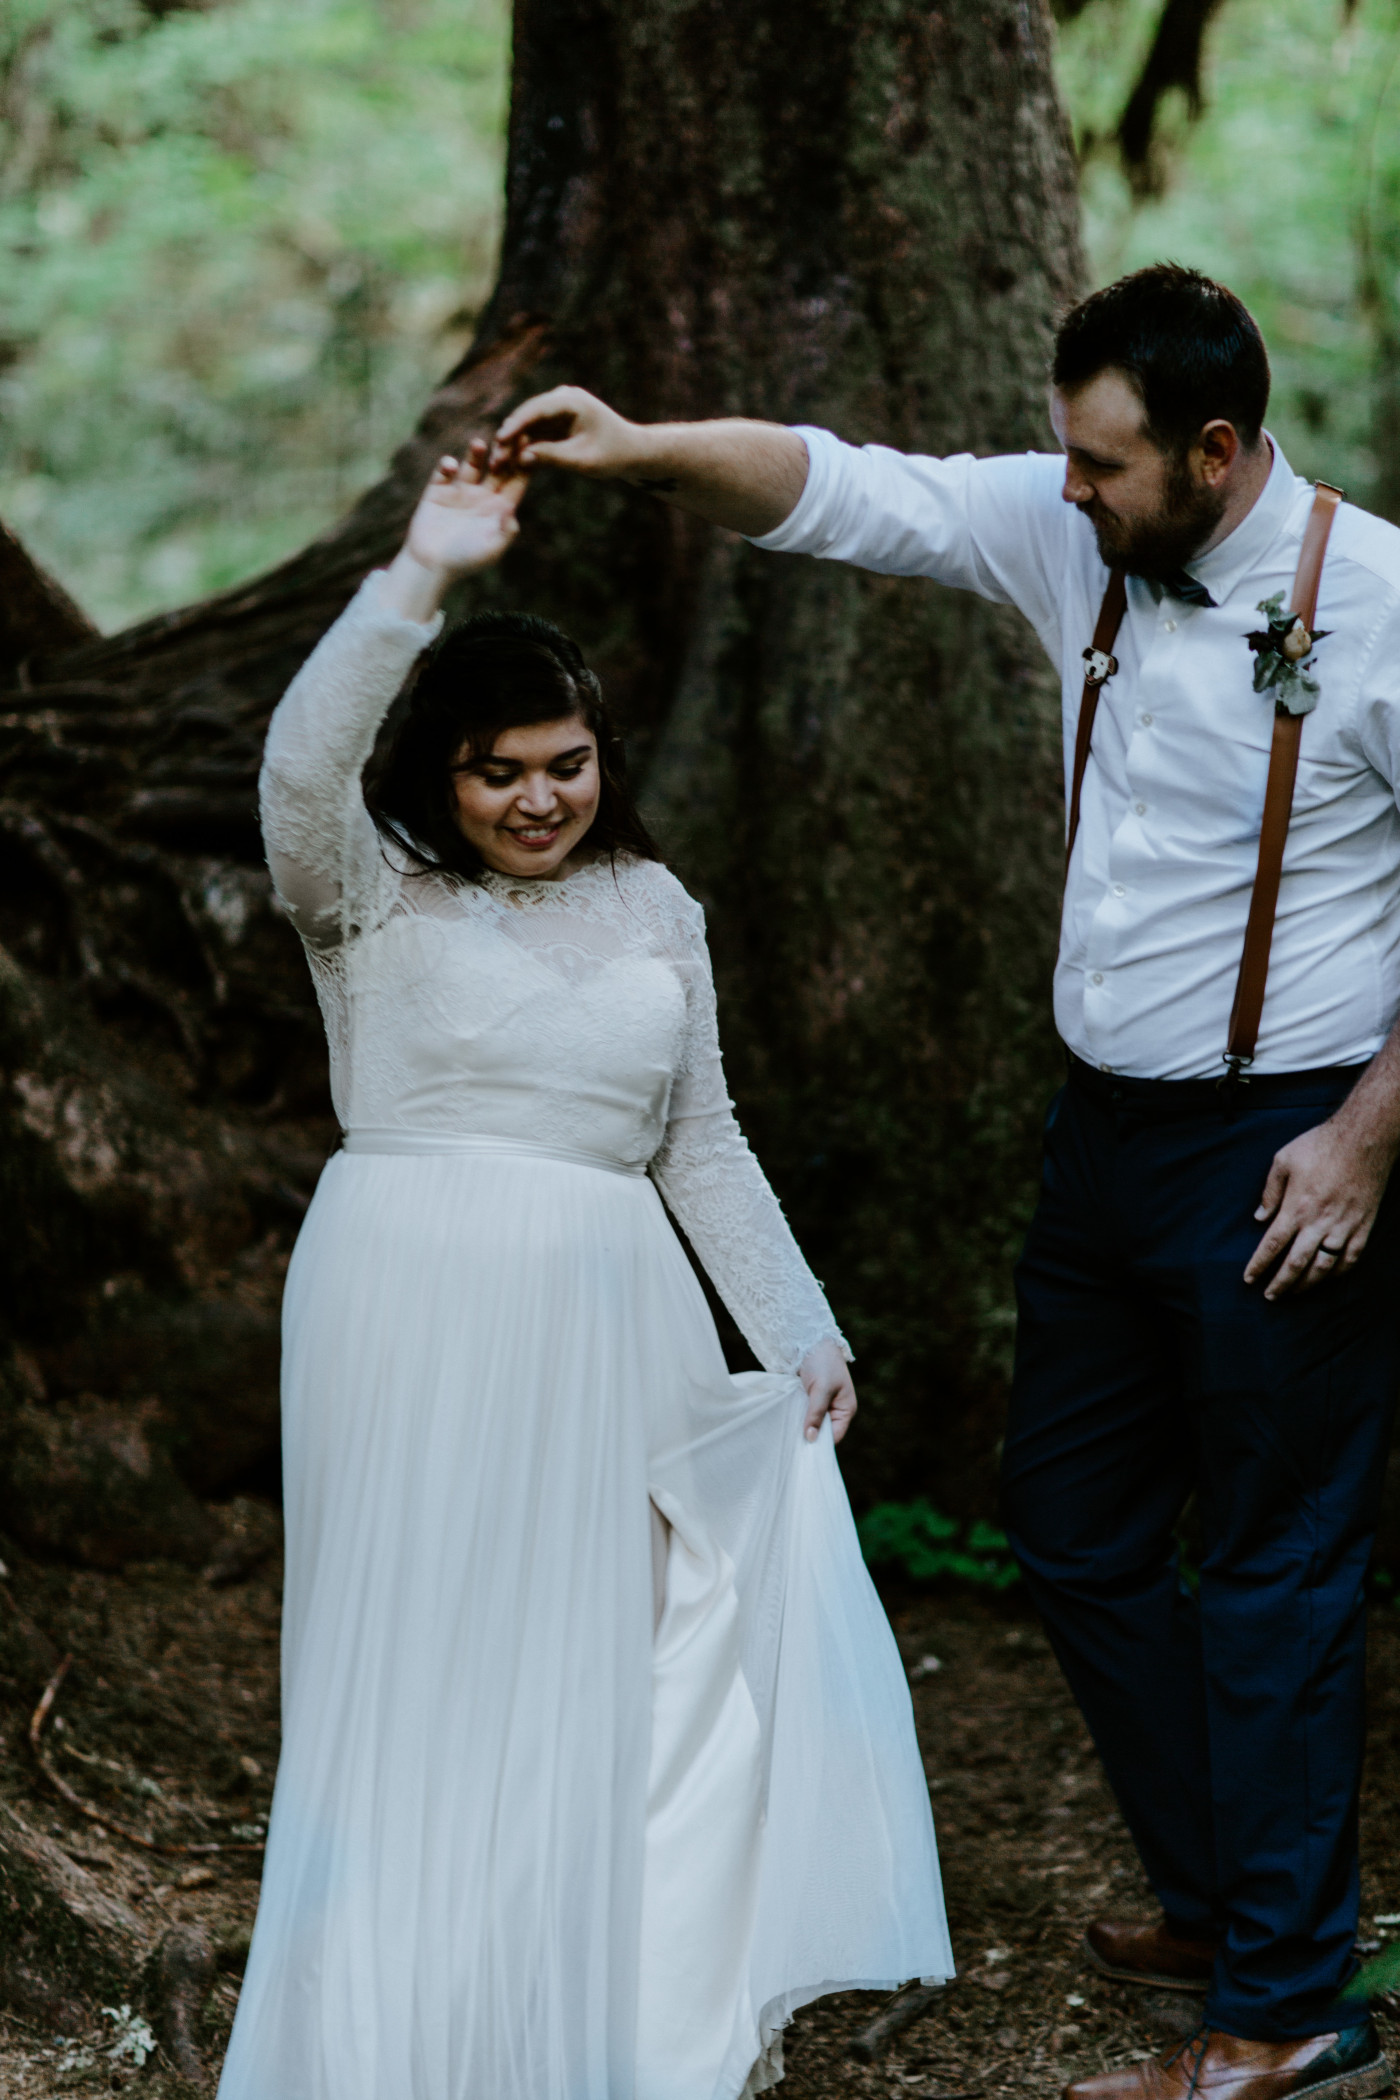 Jack and Brooke dancing in the woods. Elopement photography at Olympic National Park by Sienna Plus Josh.